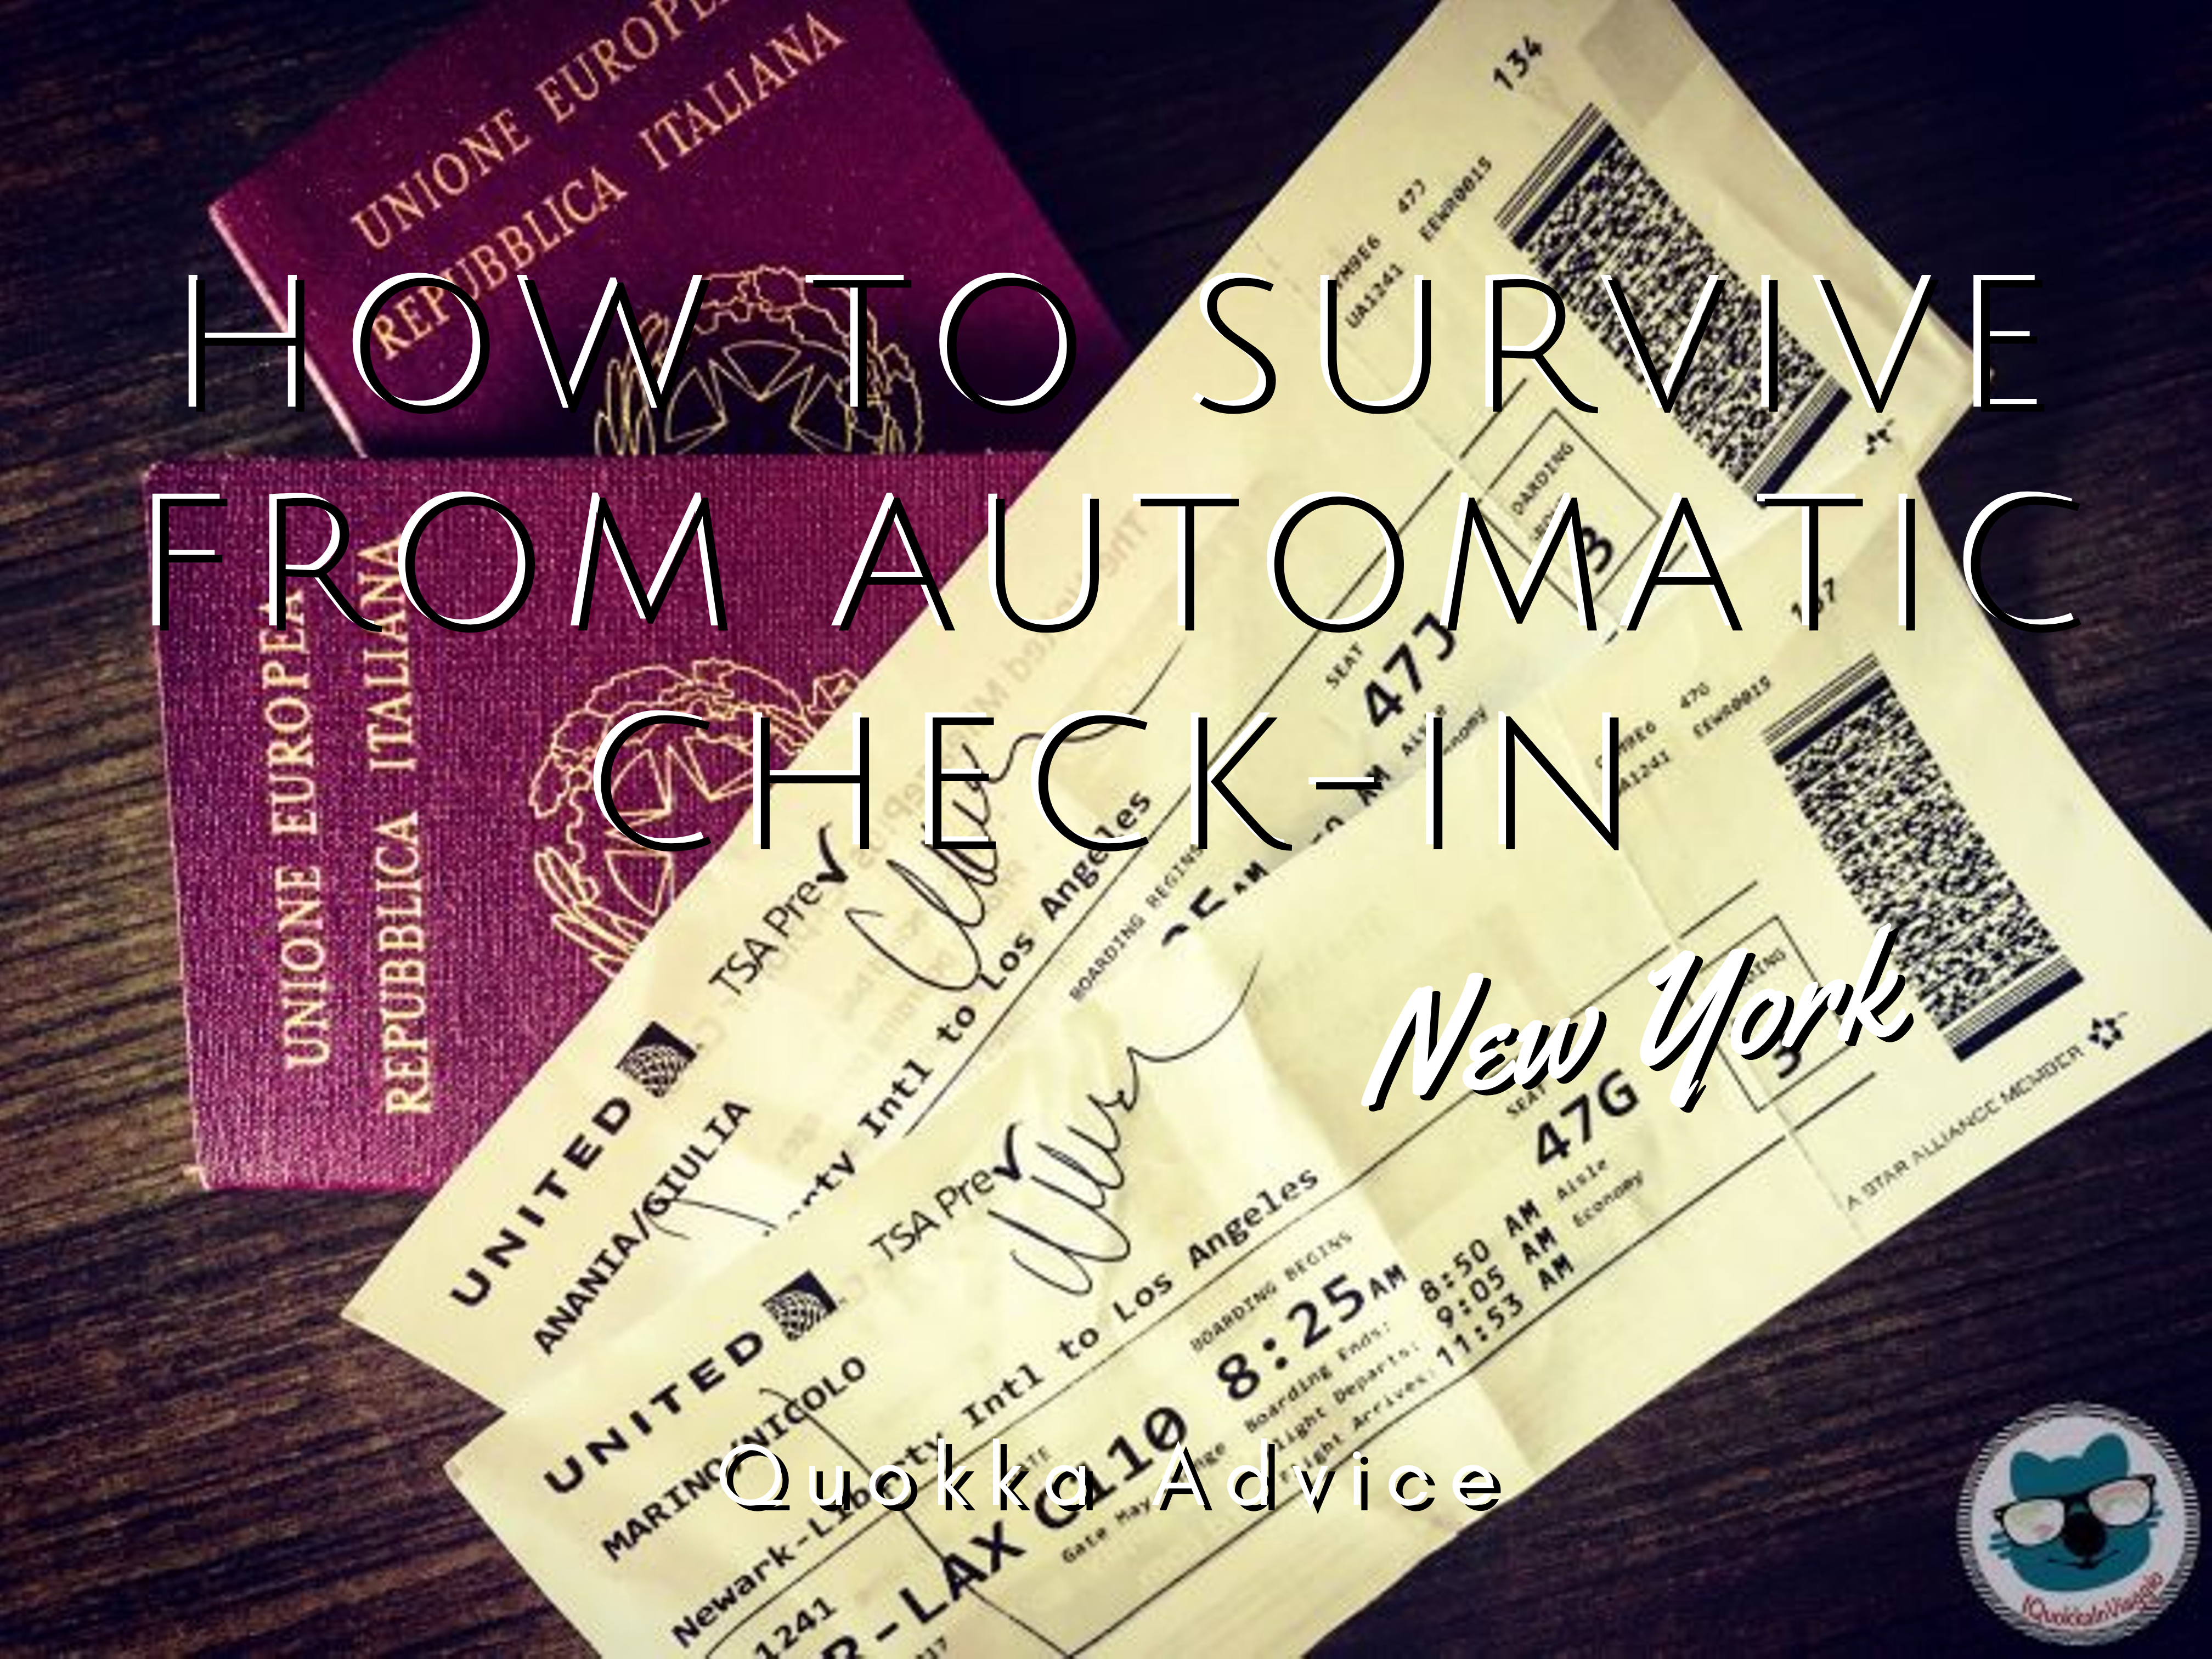 How to Survive from Automatic Check-In